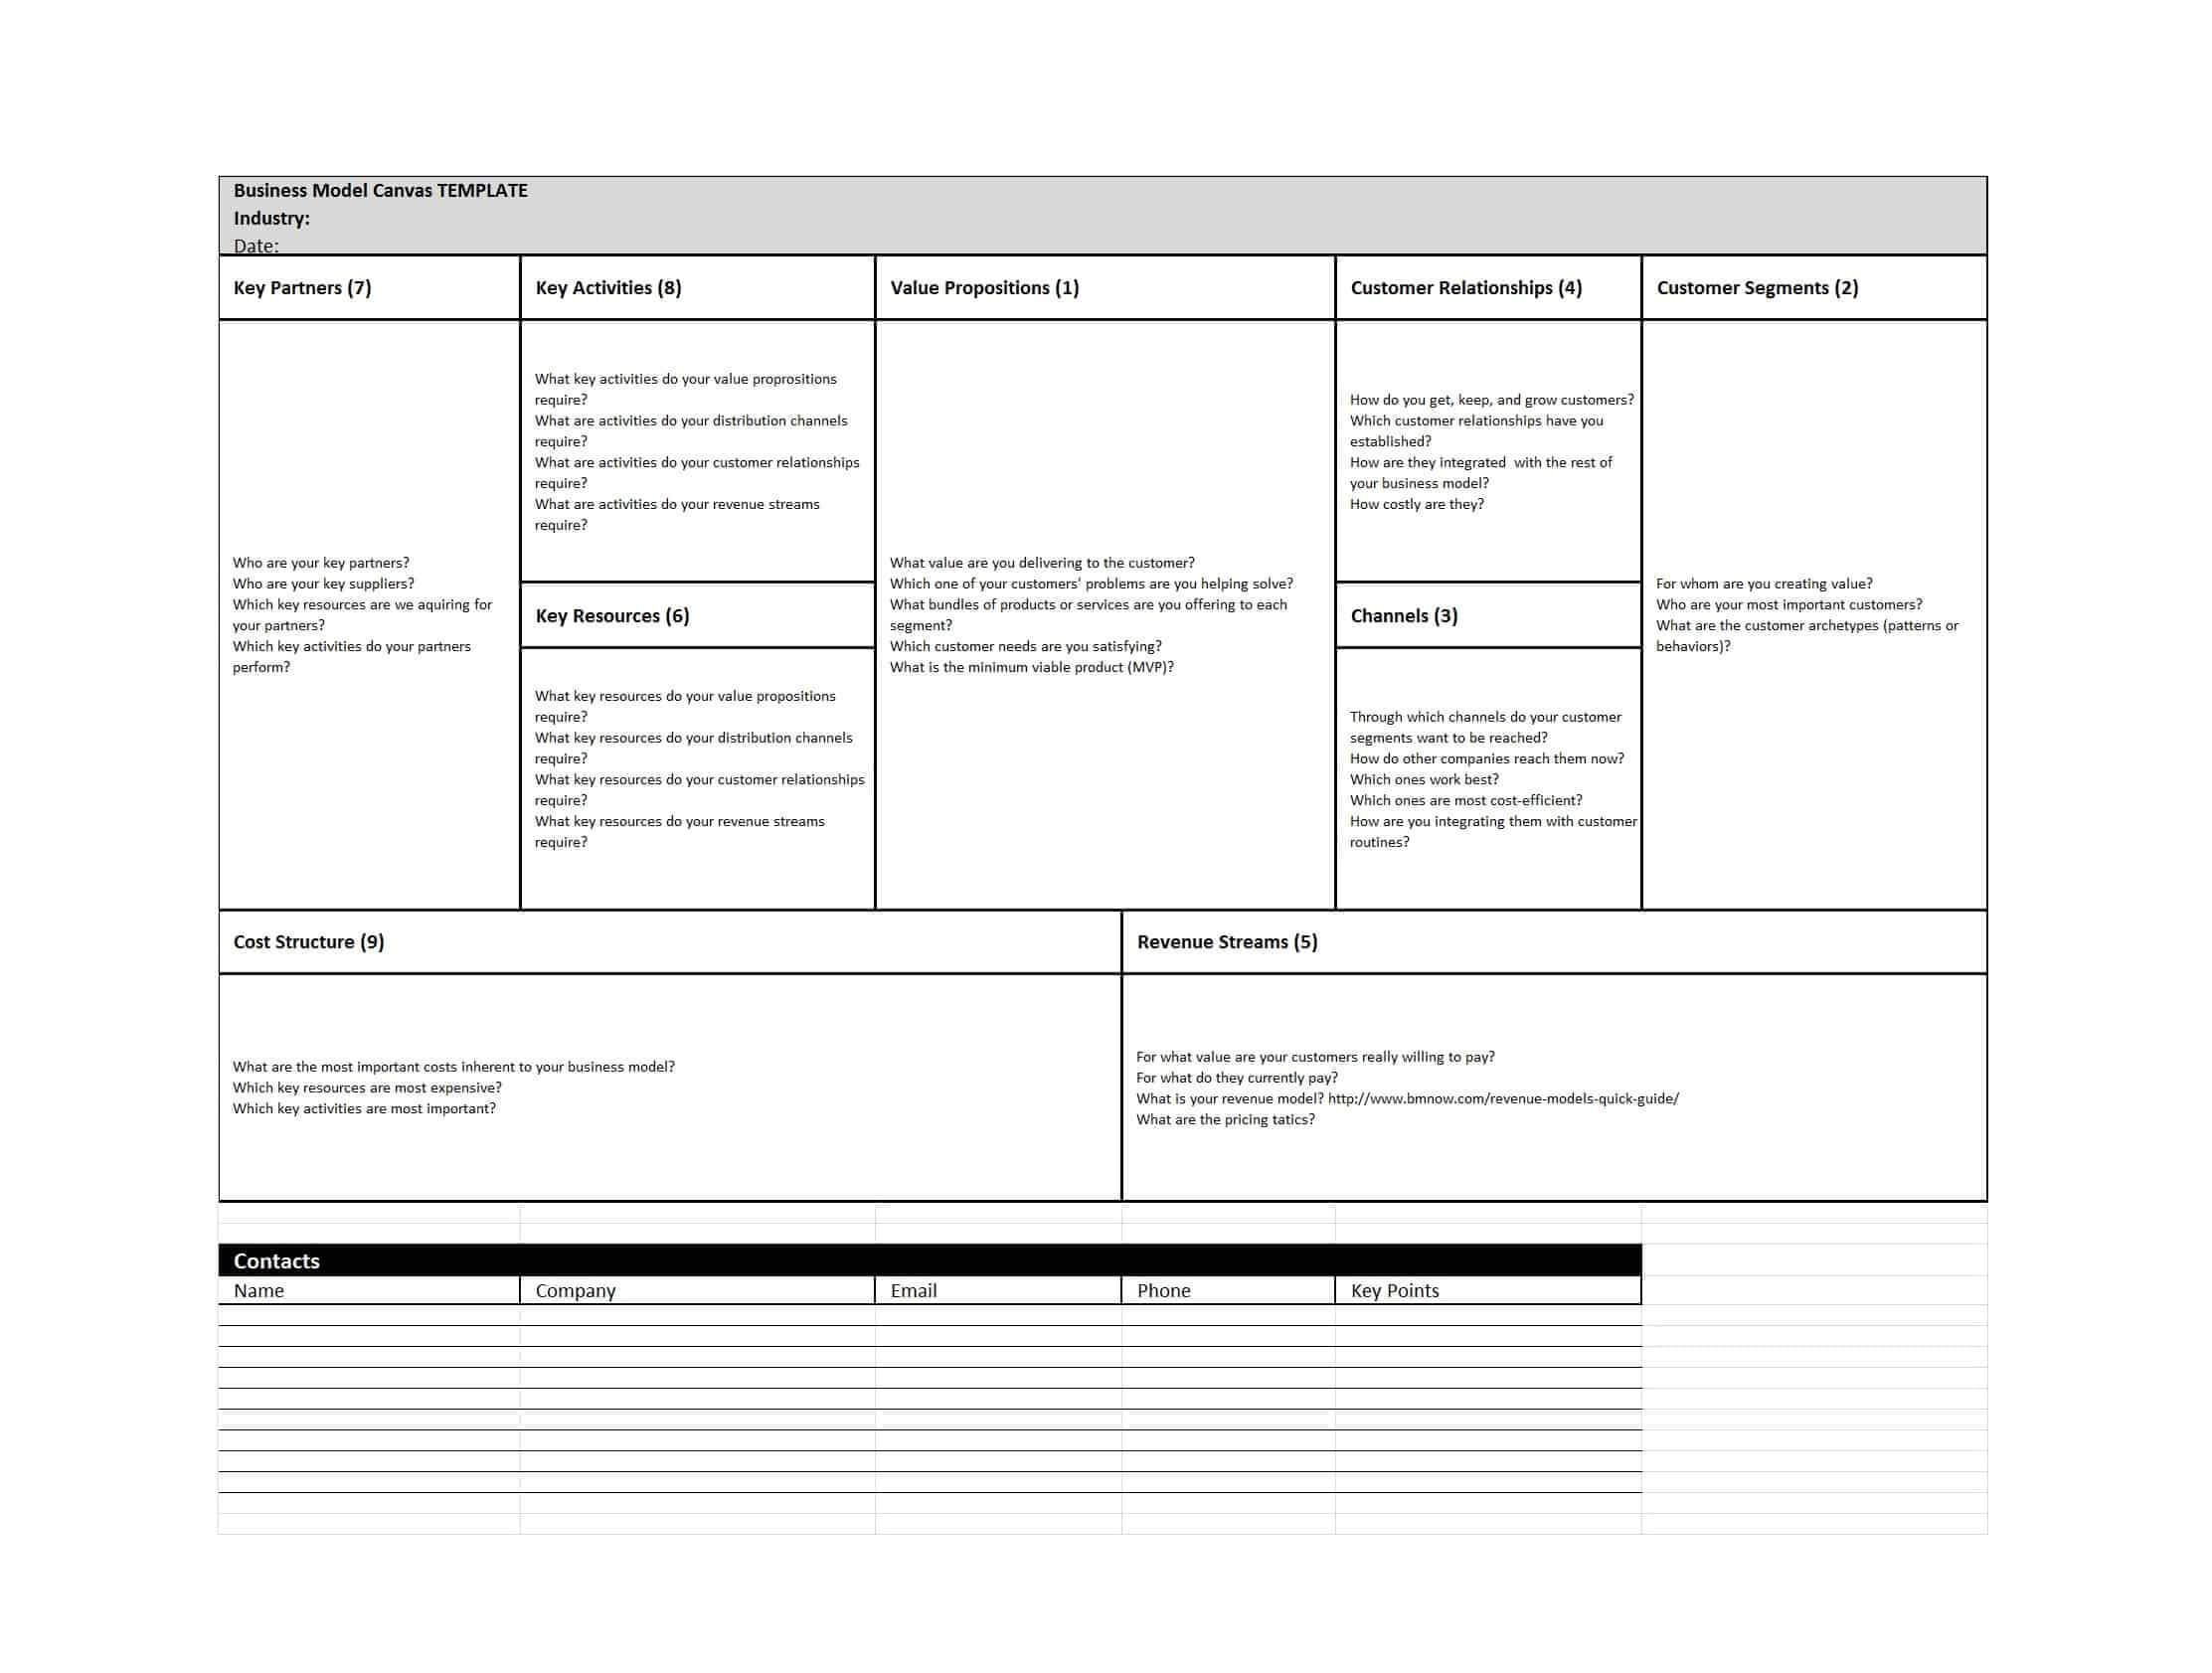 50 Amazing Business Model Canvas Templates ᐅ Template Lab With Regard To Business Model Canvas Template Word